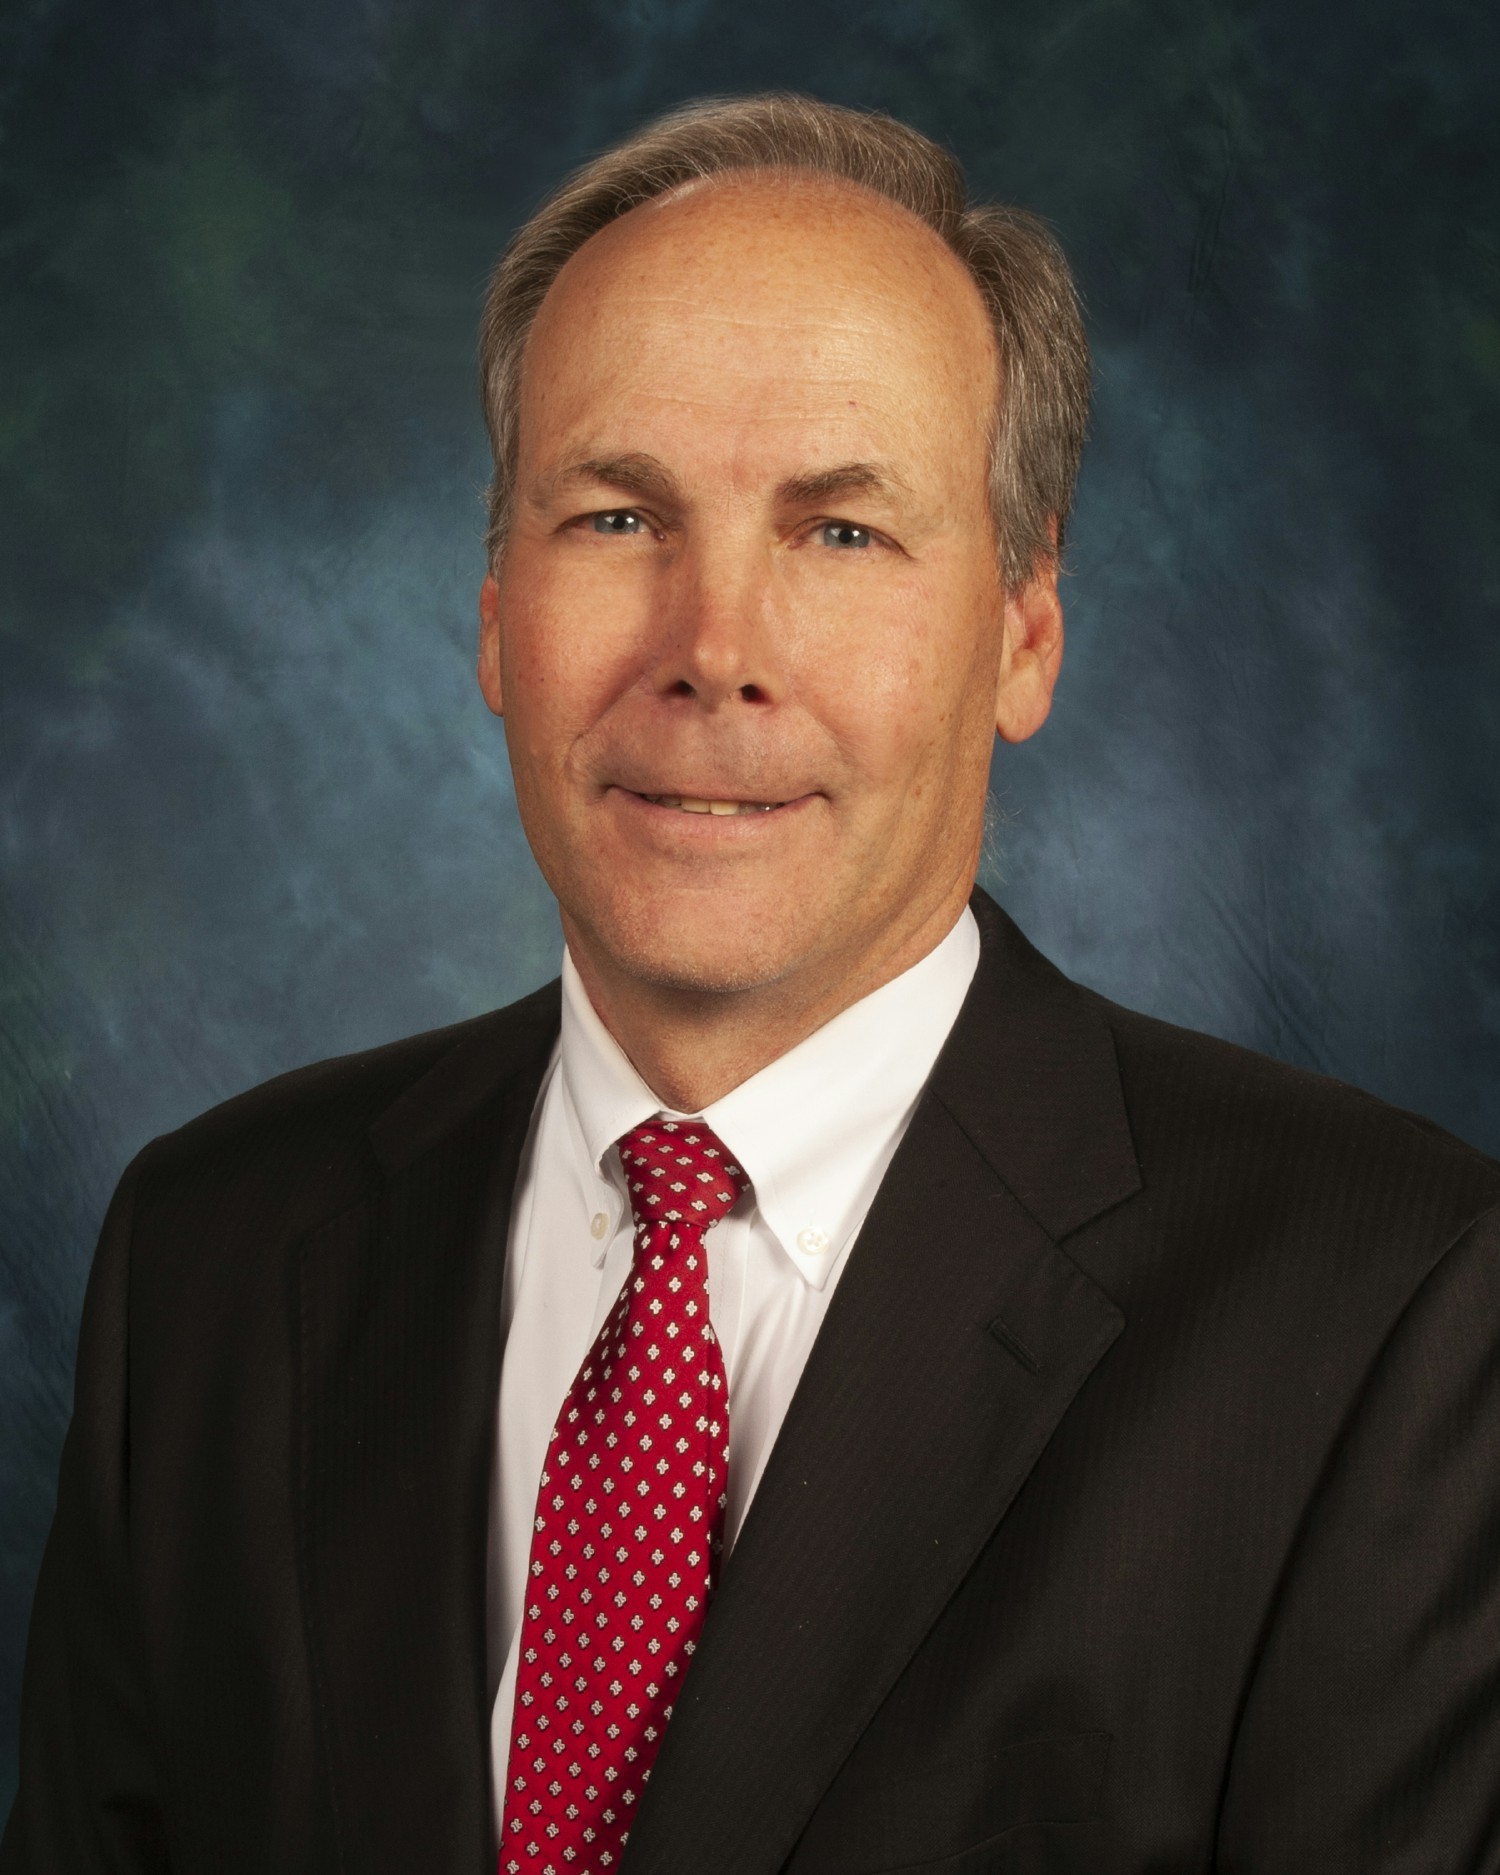 James Blackledge, Chairman and CEO of Mutual of Omaha